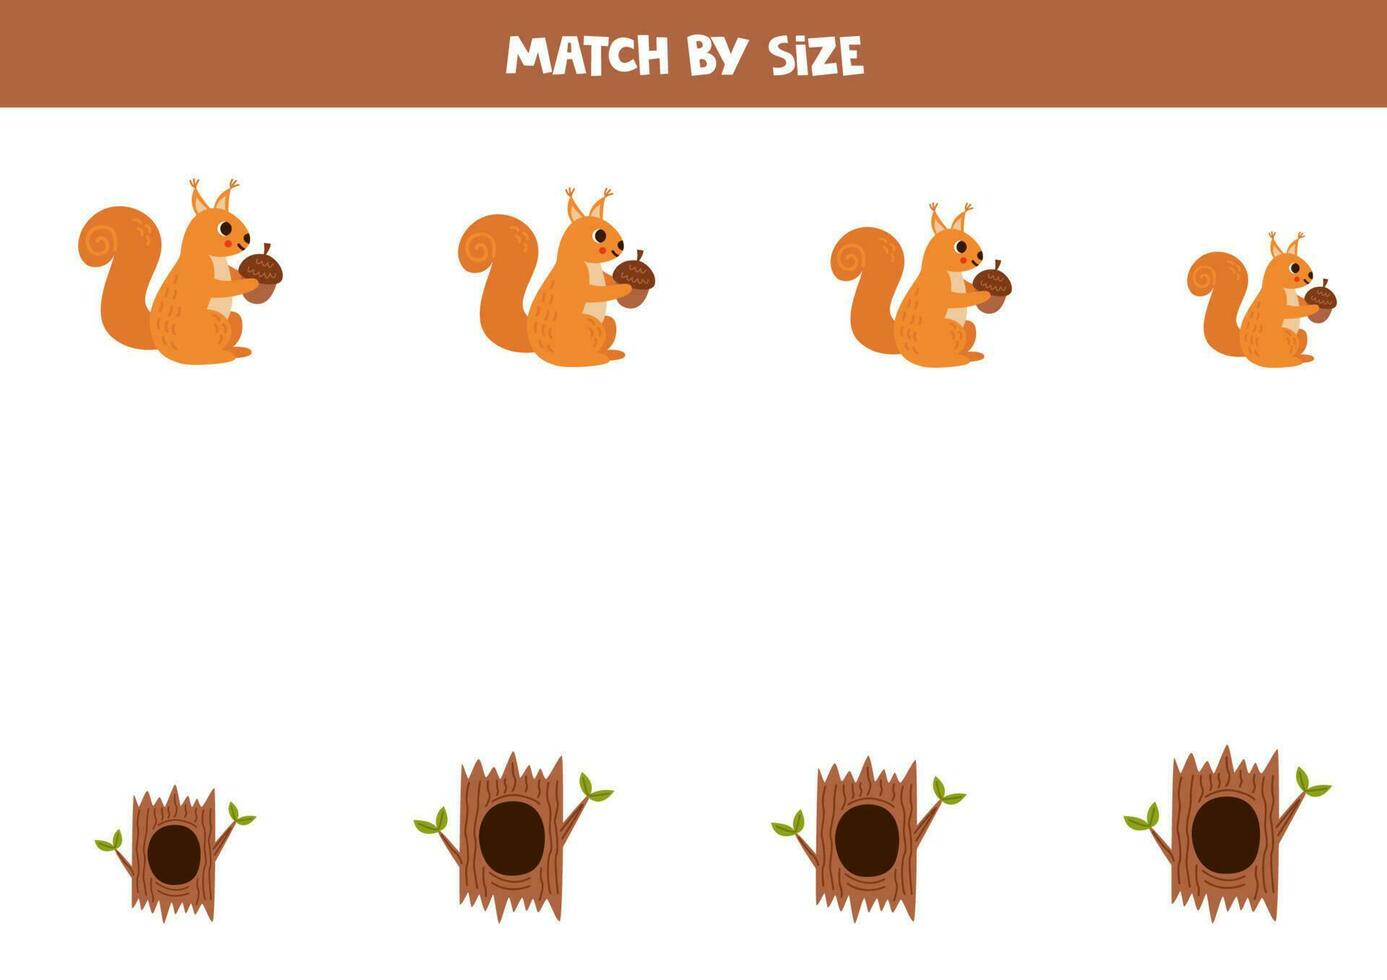 Matching game for preschool kids. Match squirrels and tree hollows by size. vector